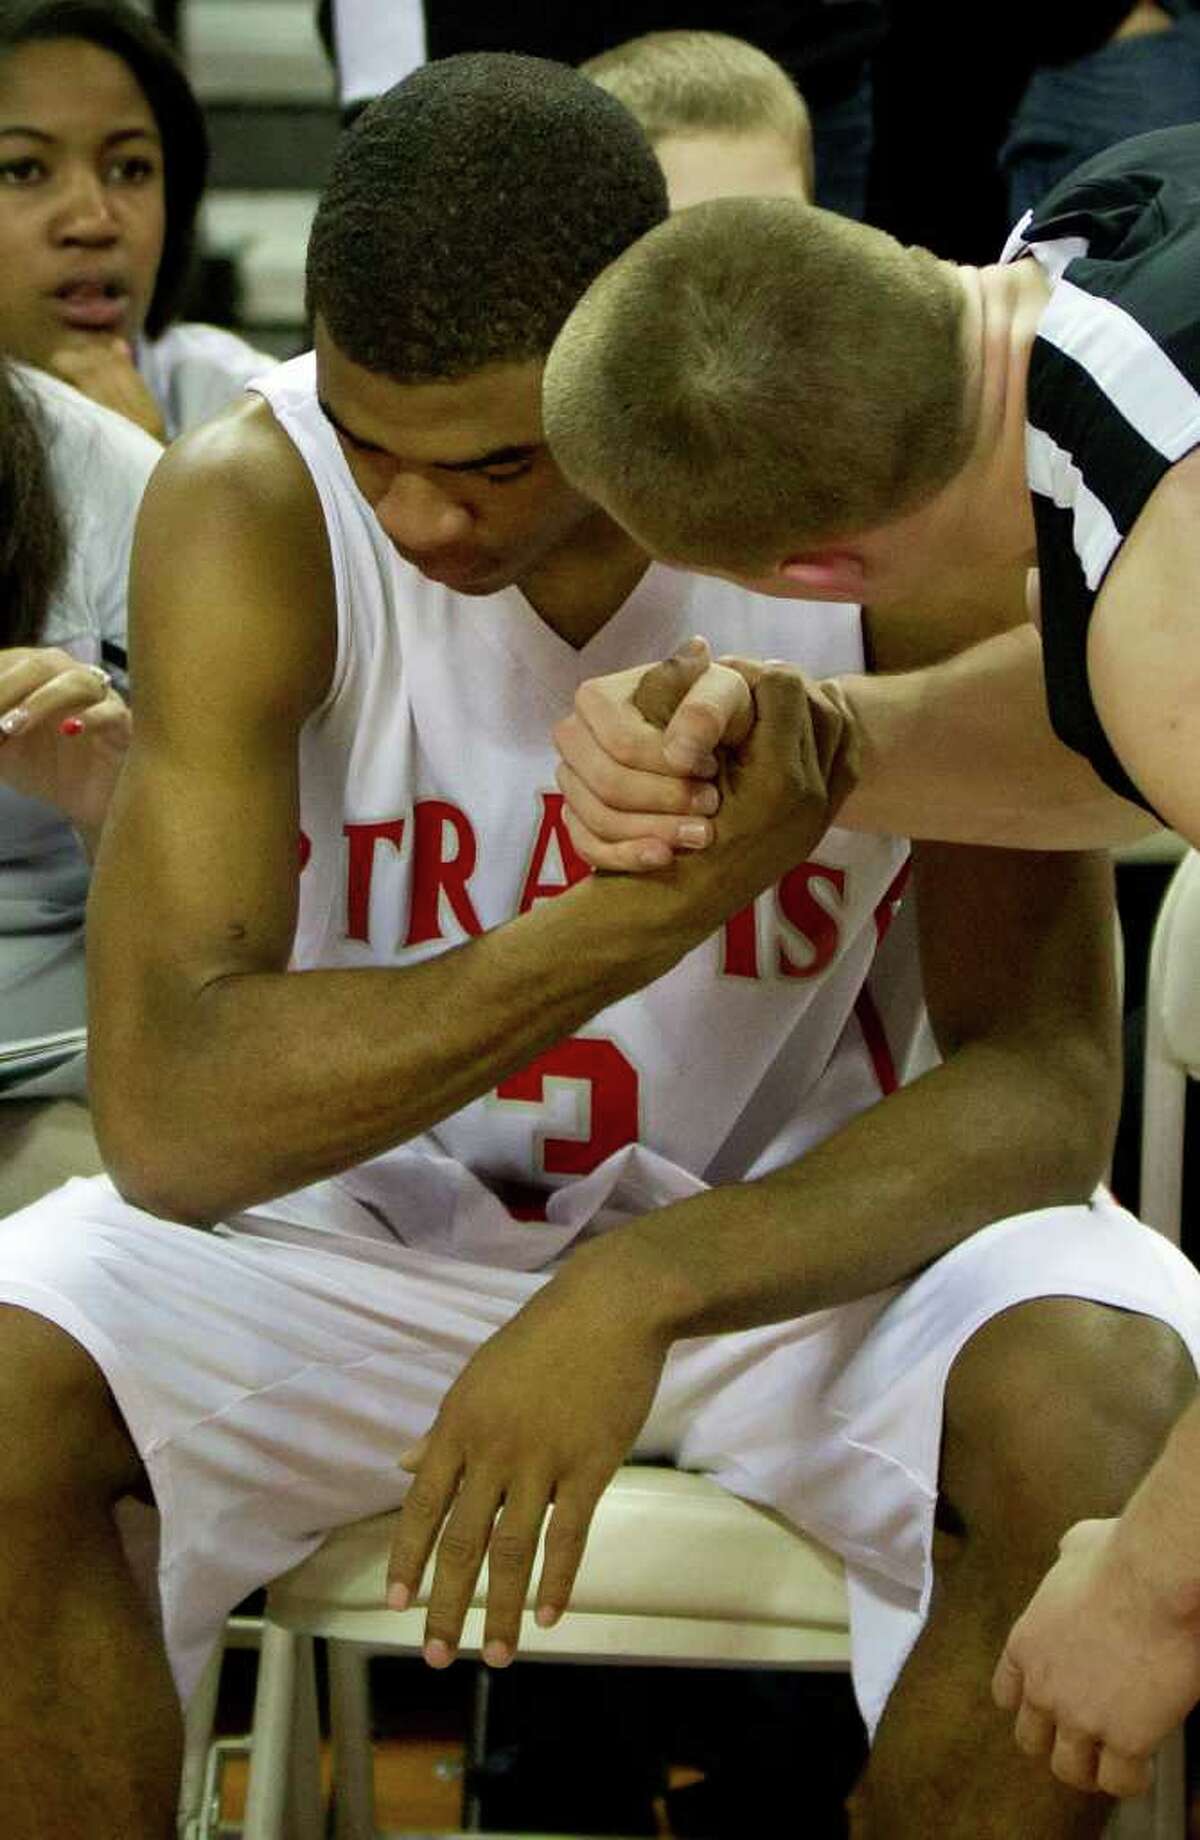 Fort Bend Travis guard Aaron Harrison is consoled by Lewisville Marcus guard Phil Forte after Marcus defeated Travis to win the UIL class 5A state championship high school basketball game at the Erwin Center on Saturday, March 10, 2012, in Austin. Lewisville Marcus won the game 56-52.